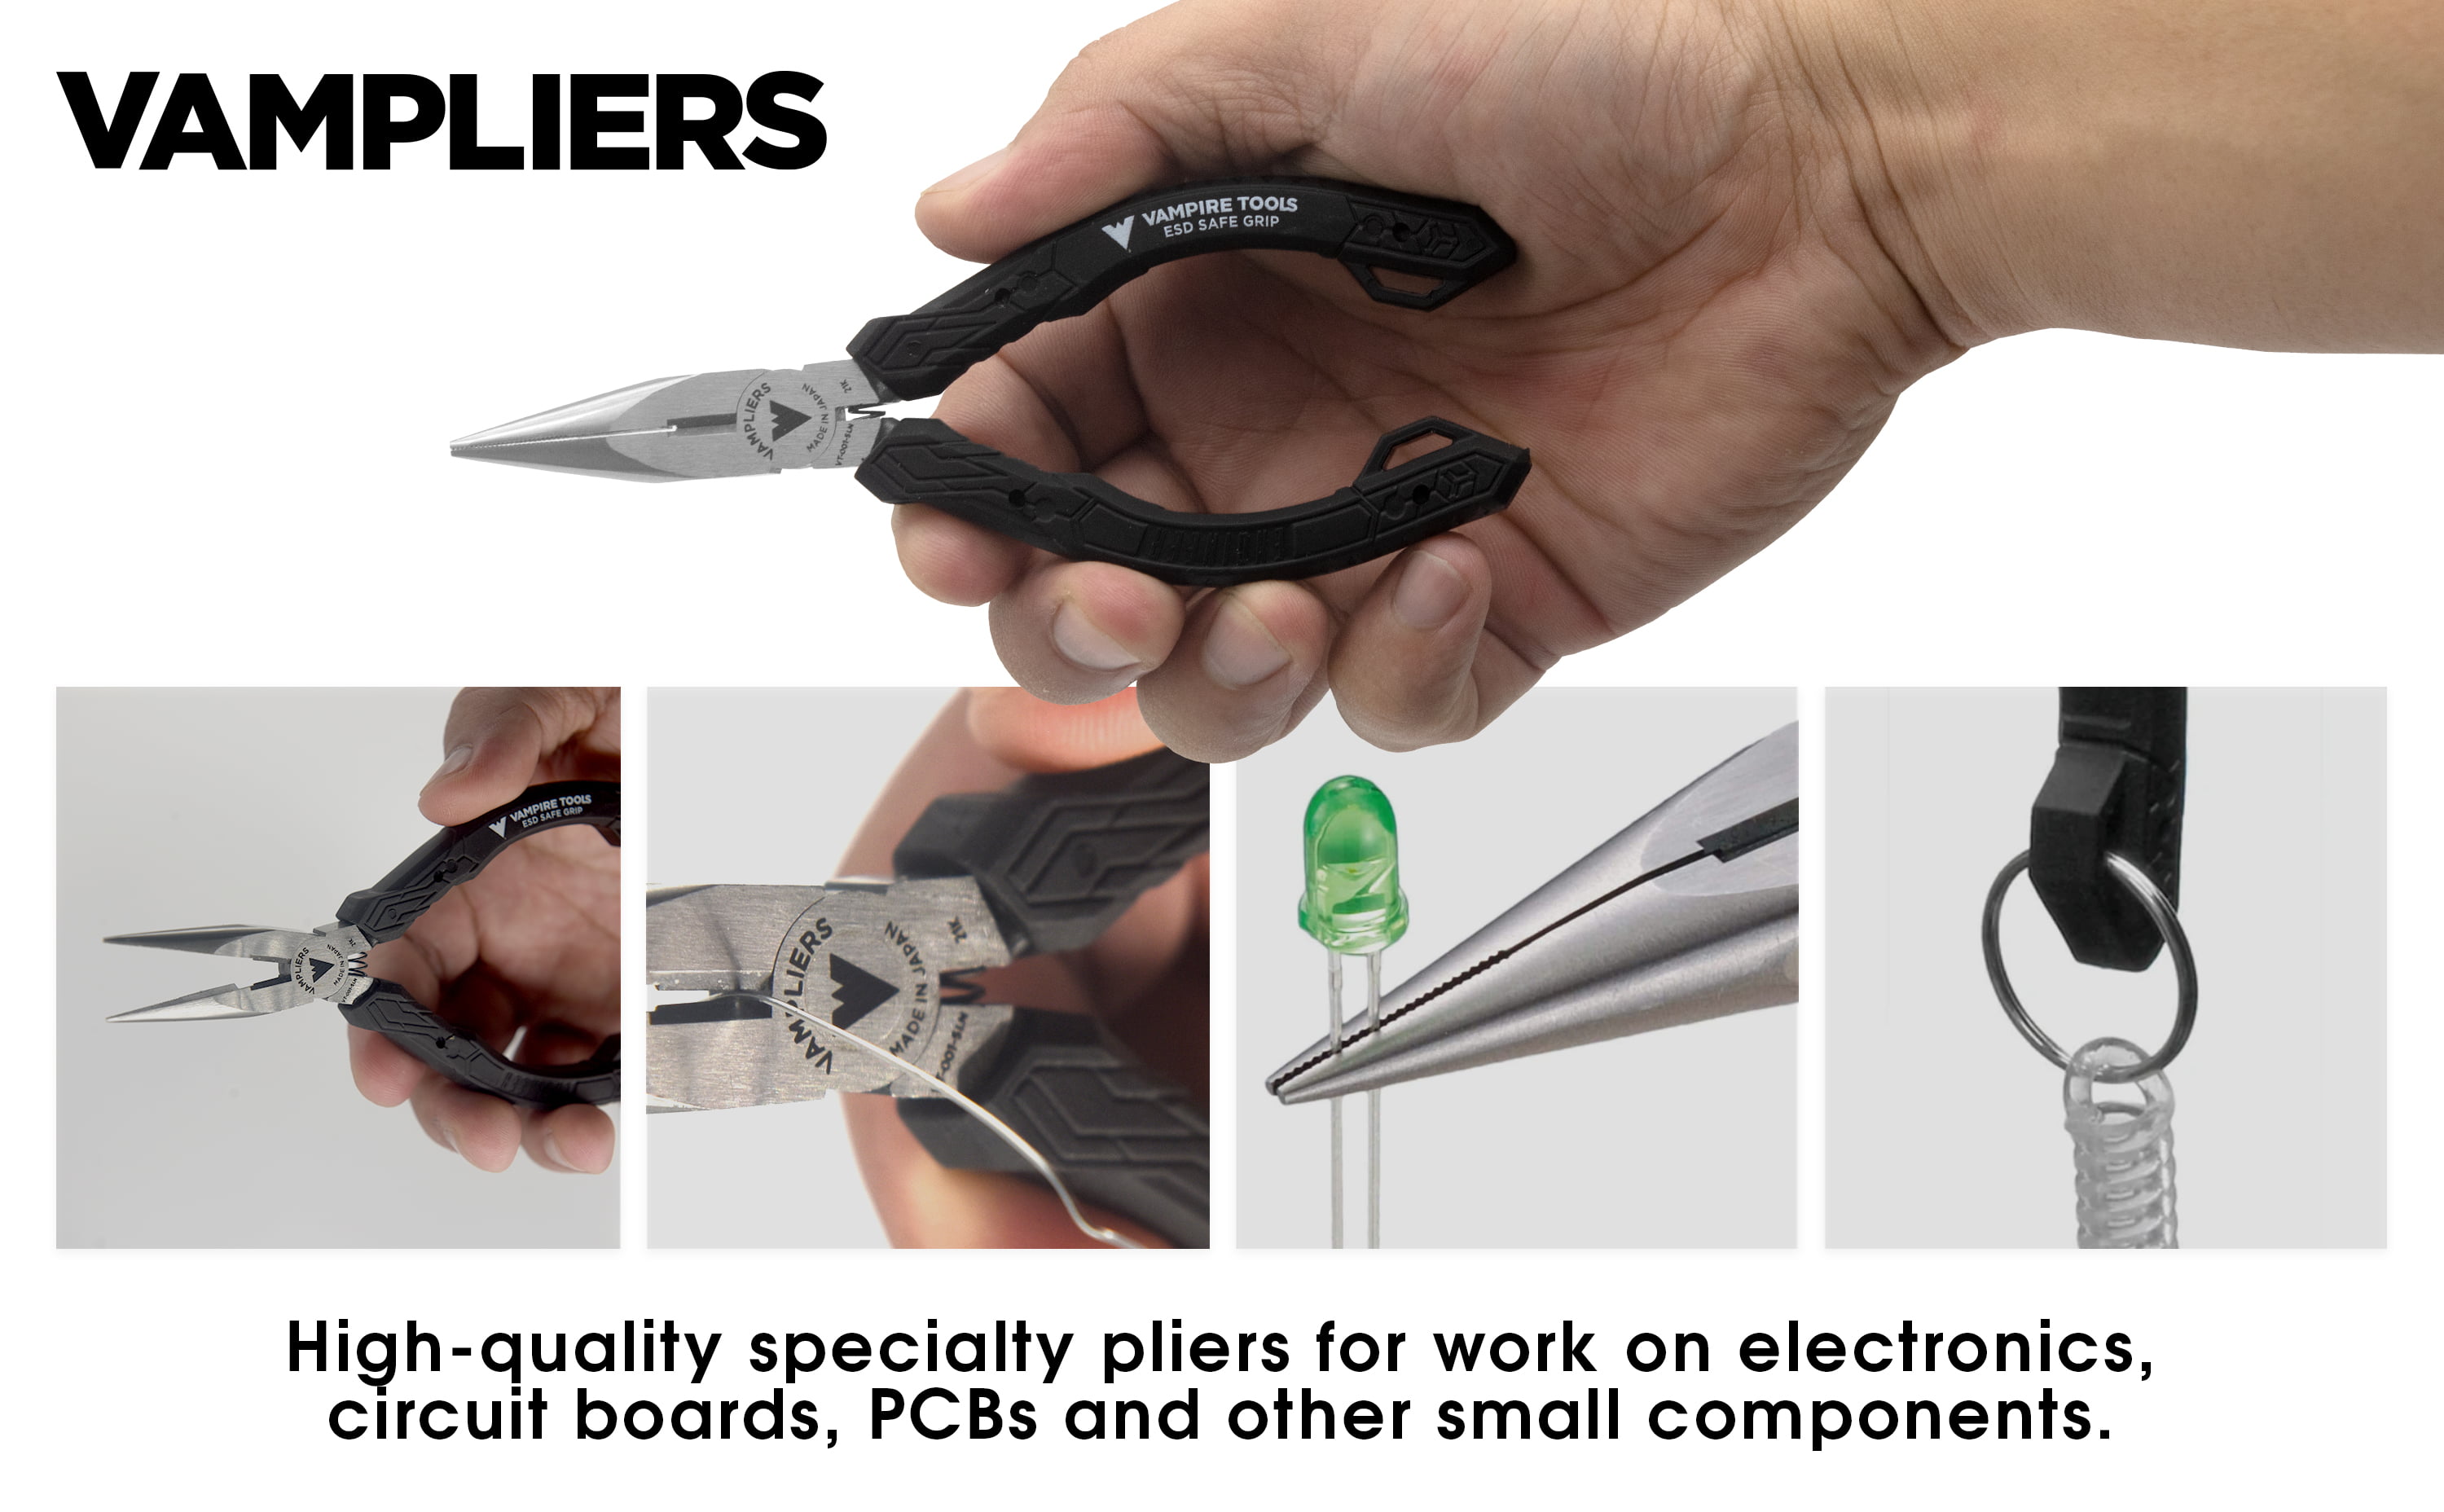 VAMPLIERS 5.5 Precision Tip Carbon Steel Mini Needle Nose Pliers with No  Serrated Jaws. ESD safe, ideal for precision work on SMD. Made in Japan